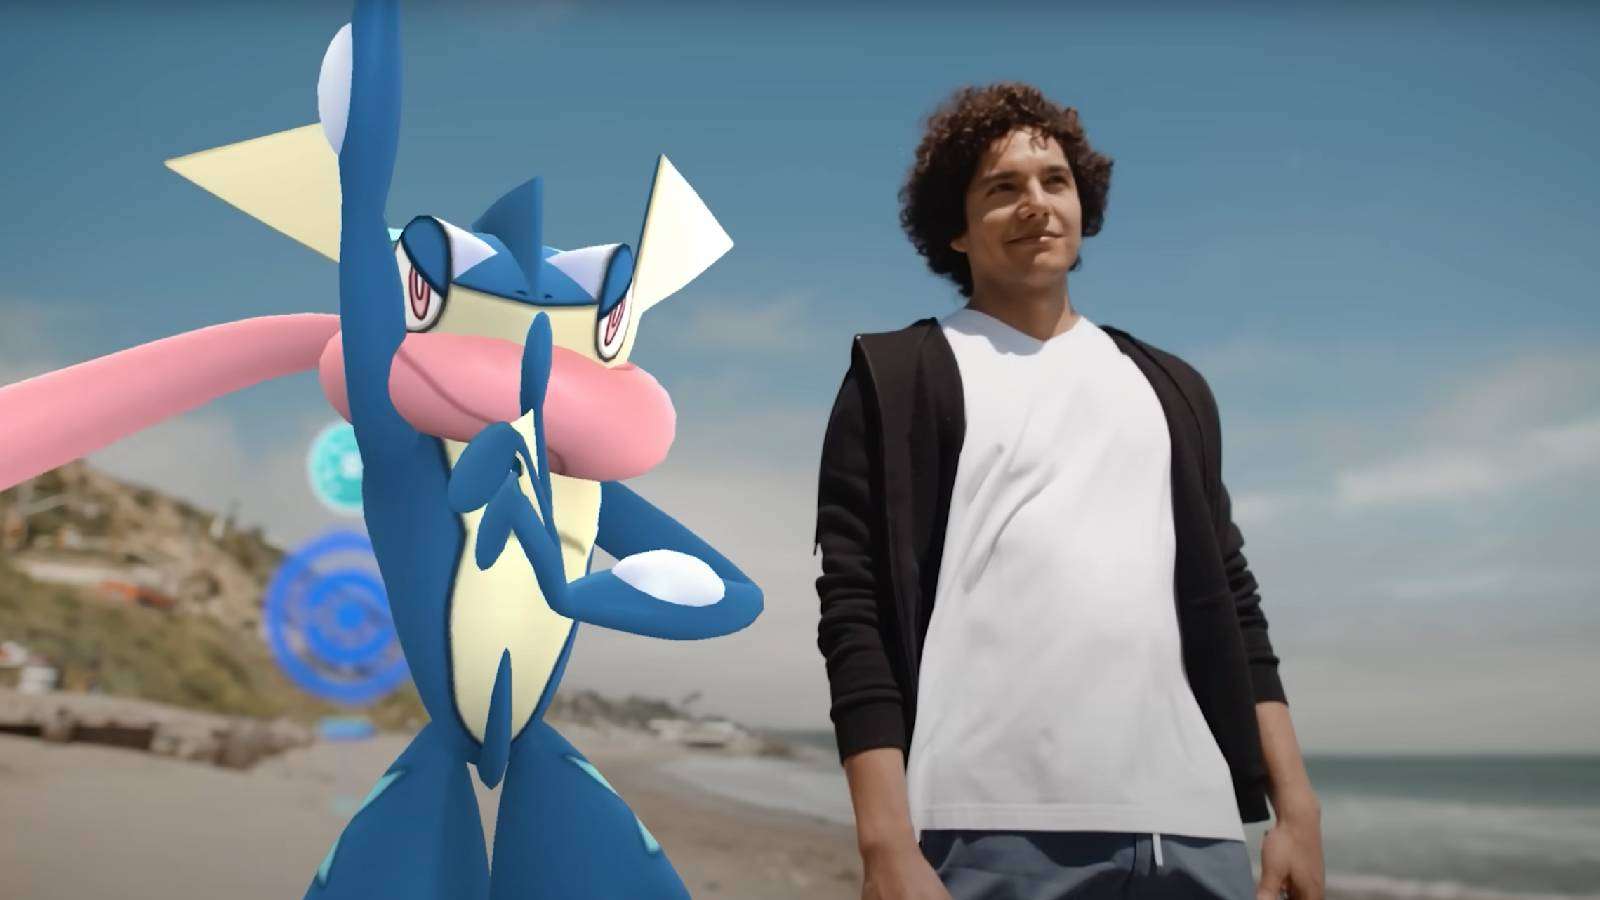 A Pokemon Go player stands next to a 3D model of Greninja